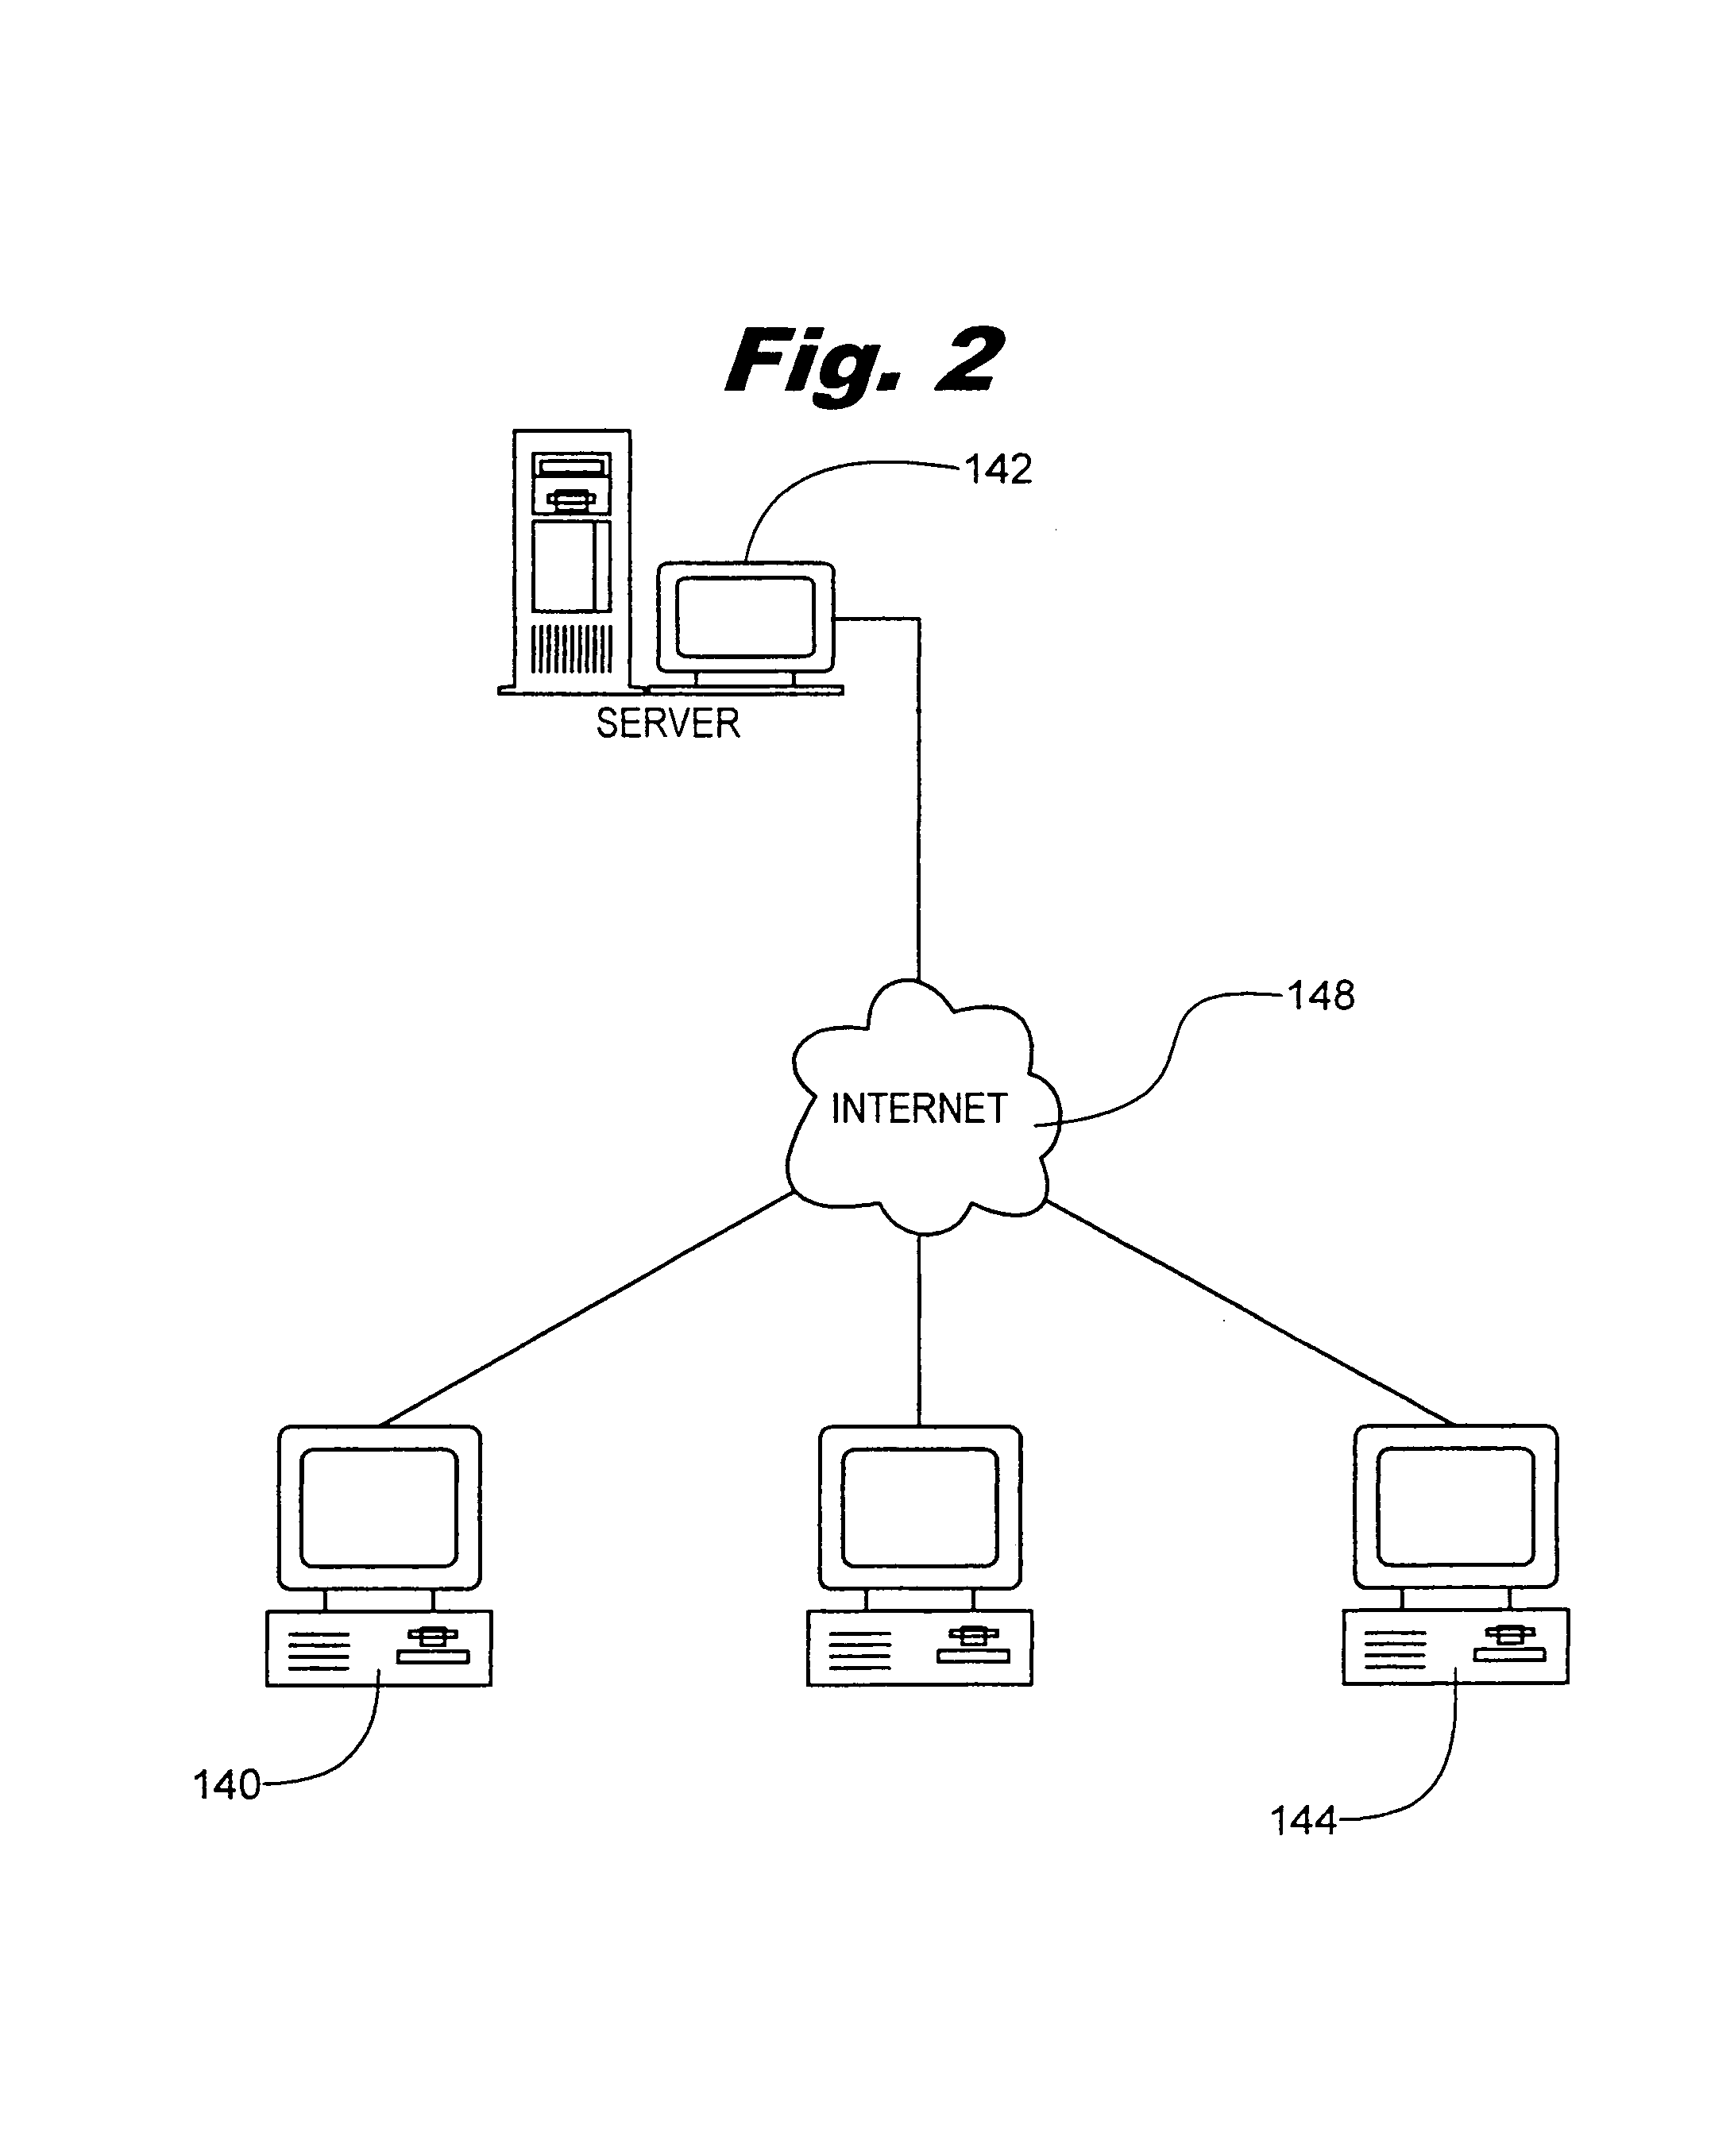 System and method of permissive data flow and application transfer